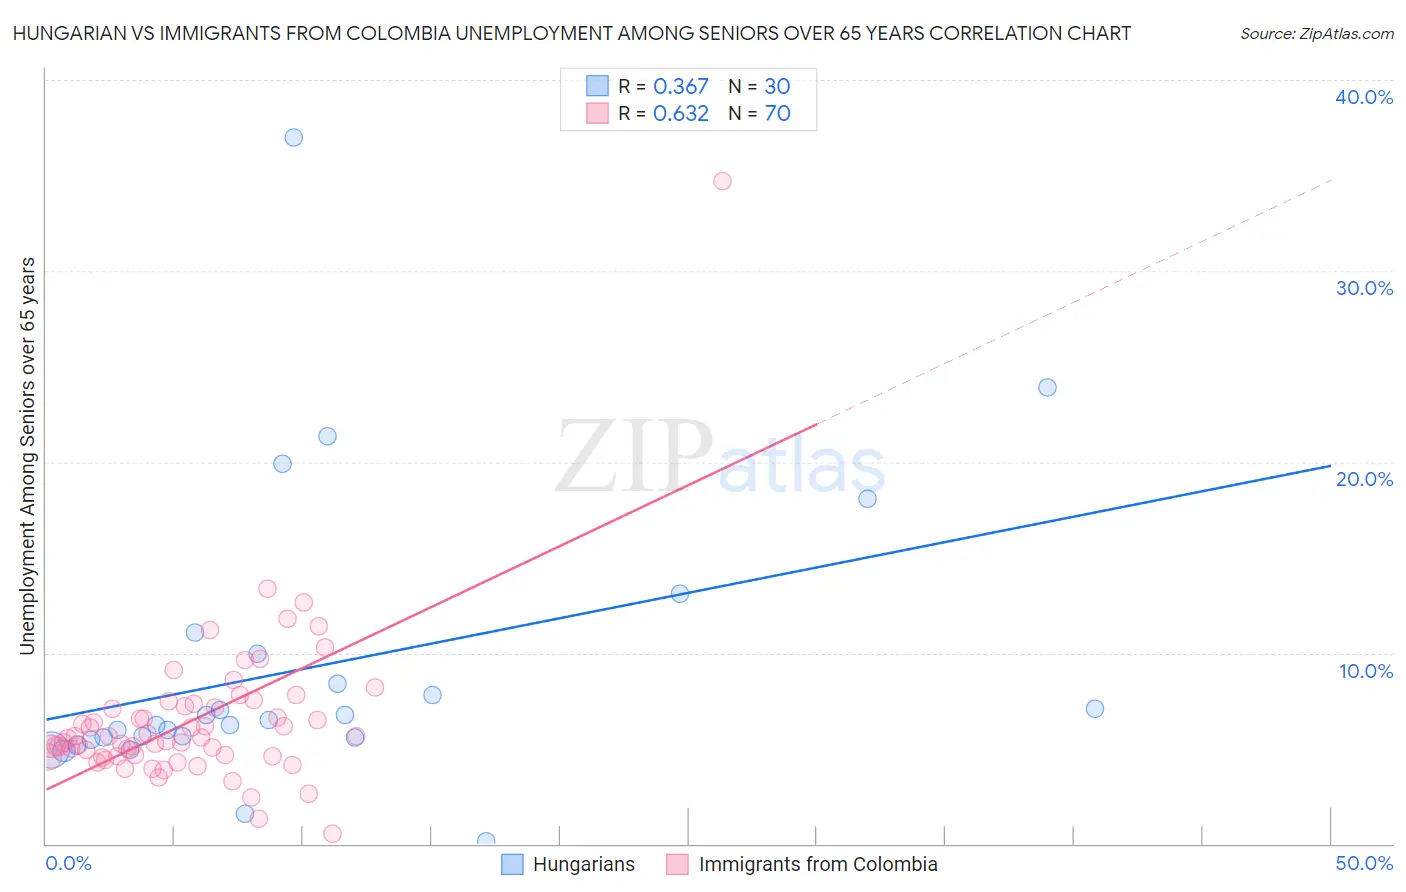 Hungarian vs Immigrants from Colombia Unemployment Among Seniors over 65 years